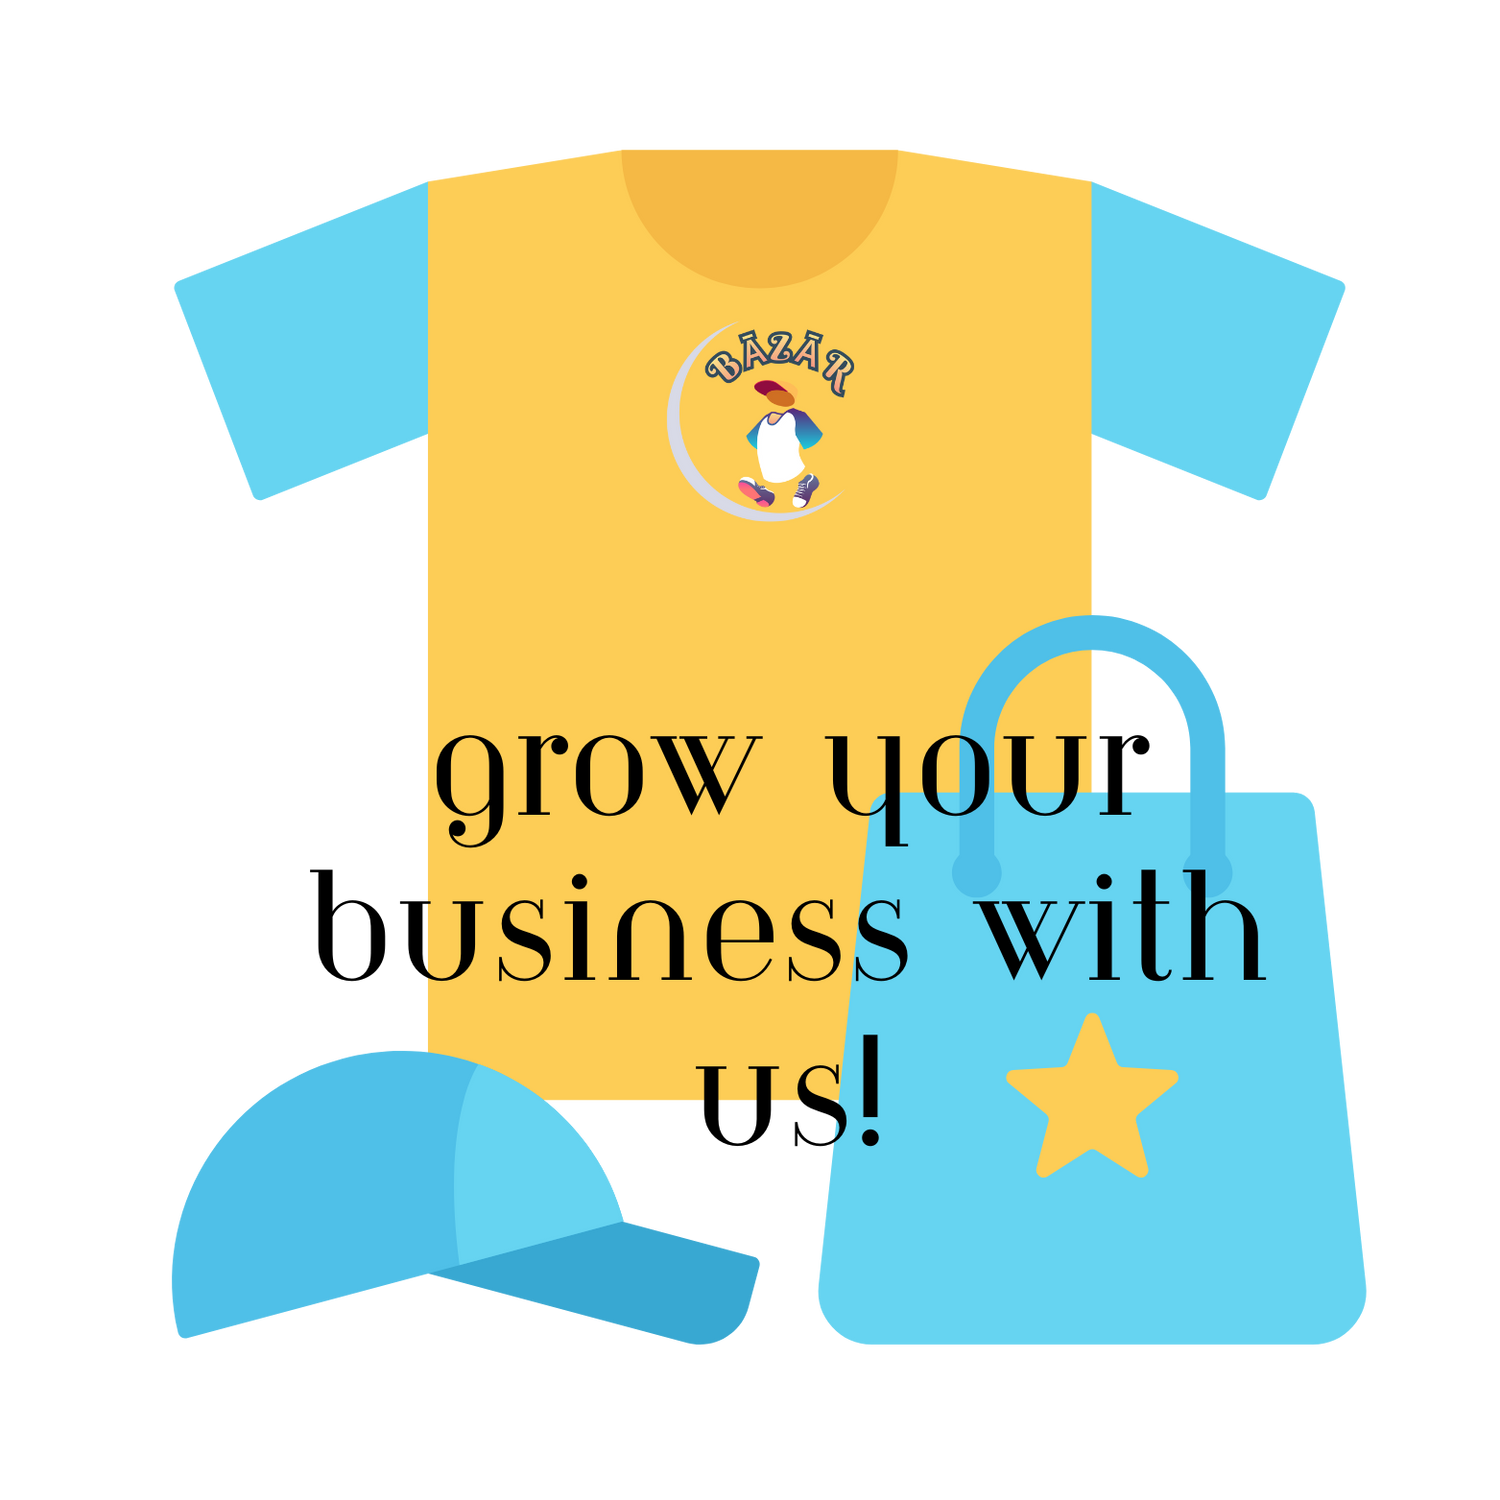 Grow your business with us